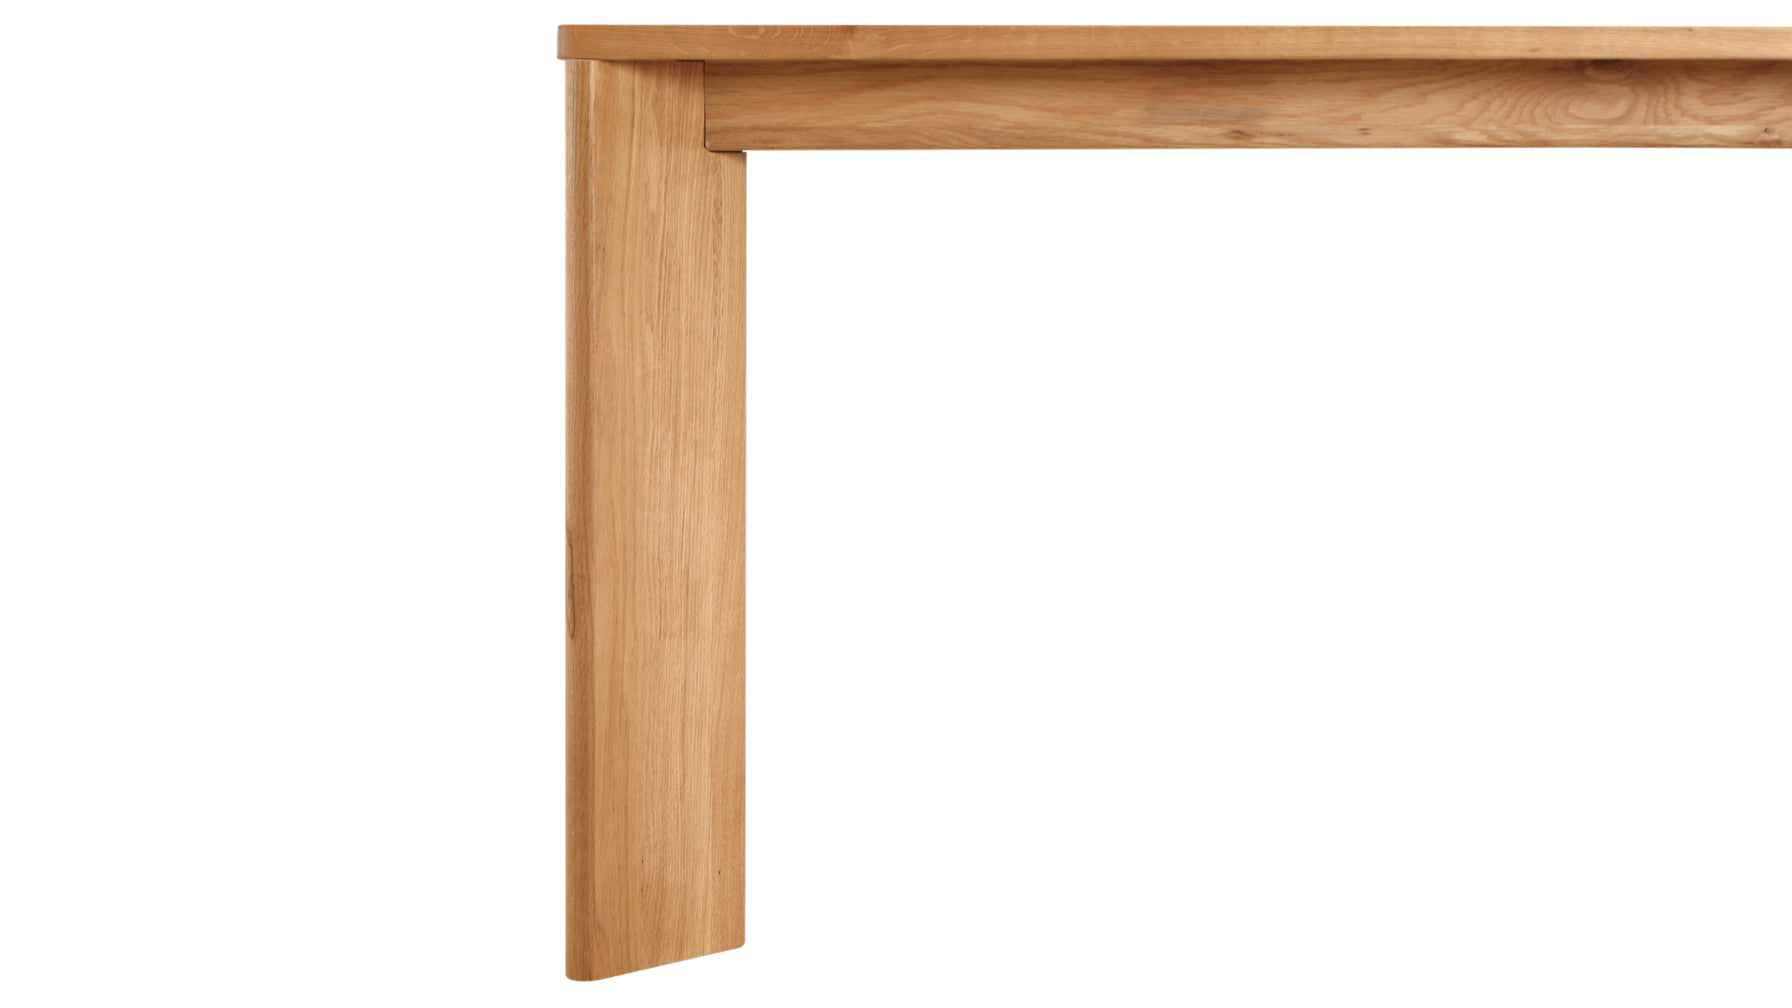 Frame Dining Table, Seats 6-8 People, Oak - Image 9